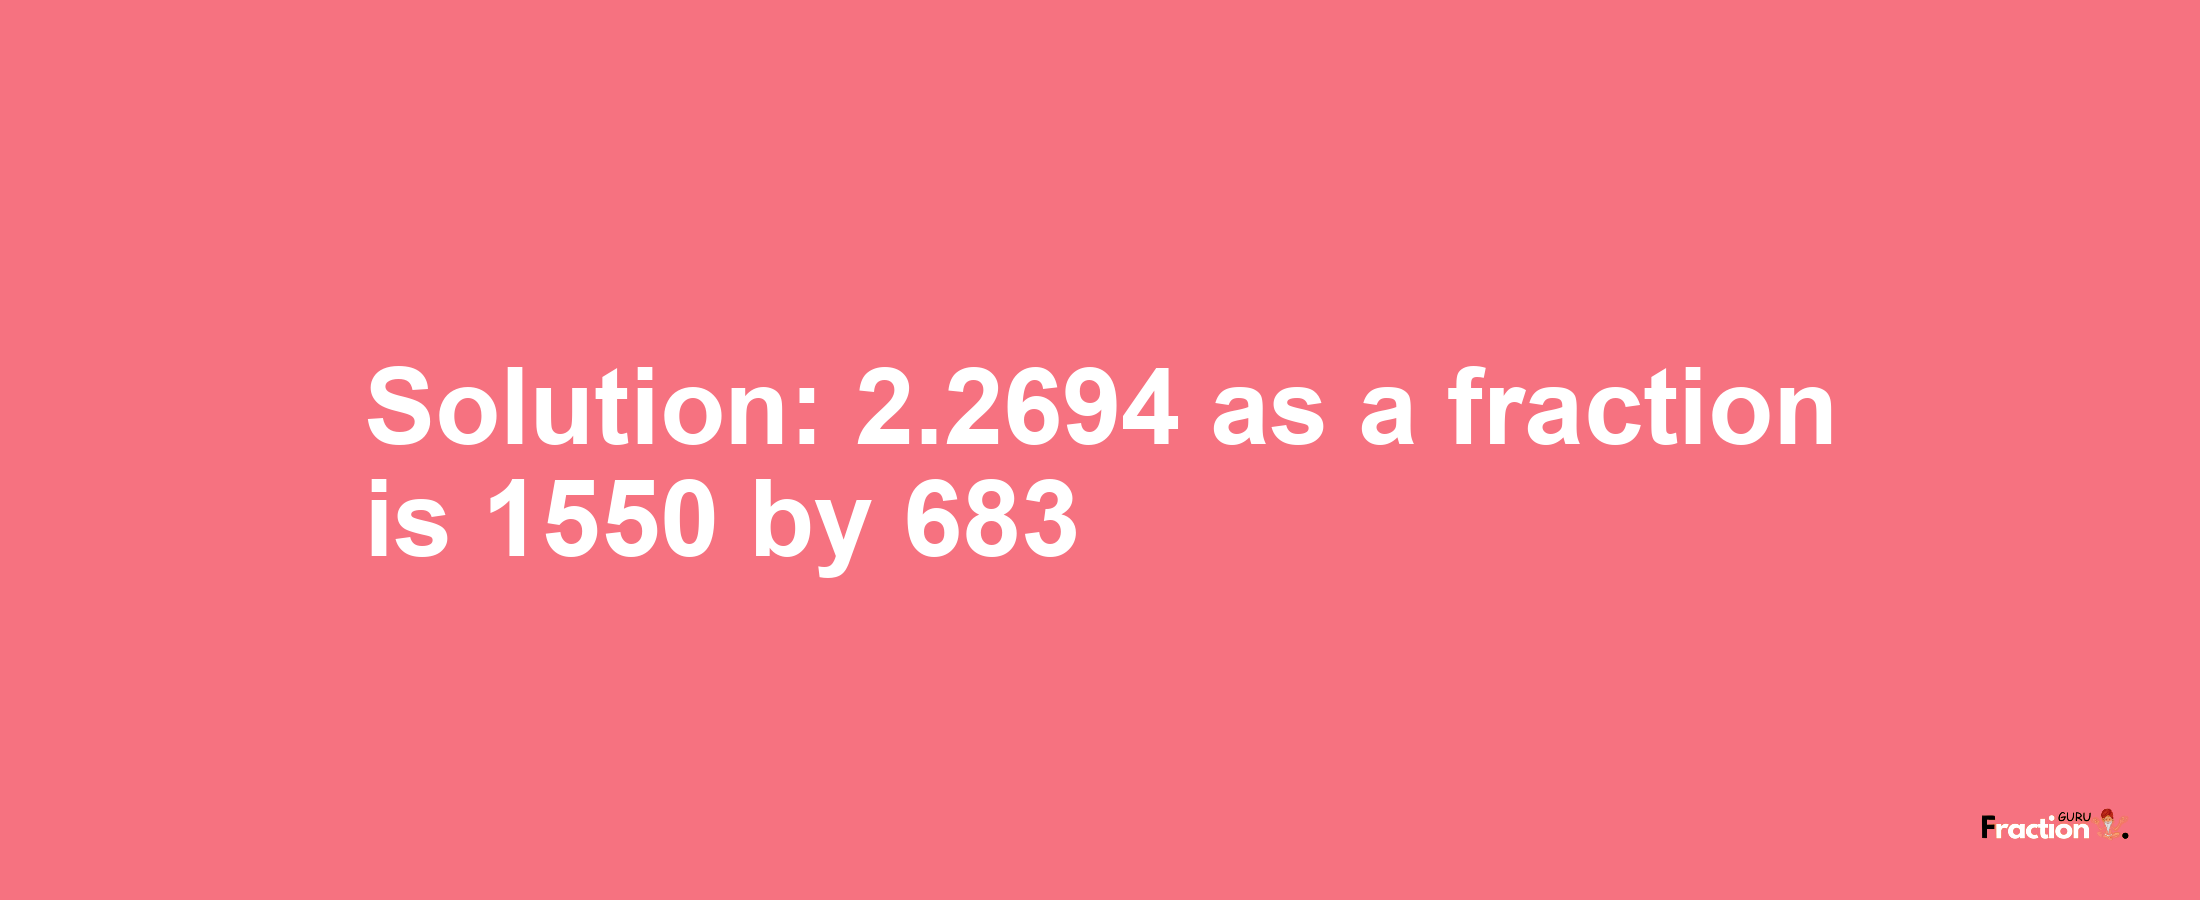 Solution:2.2694 as a fraction is 1550/683